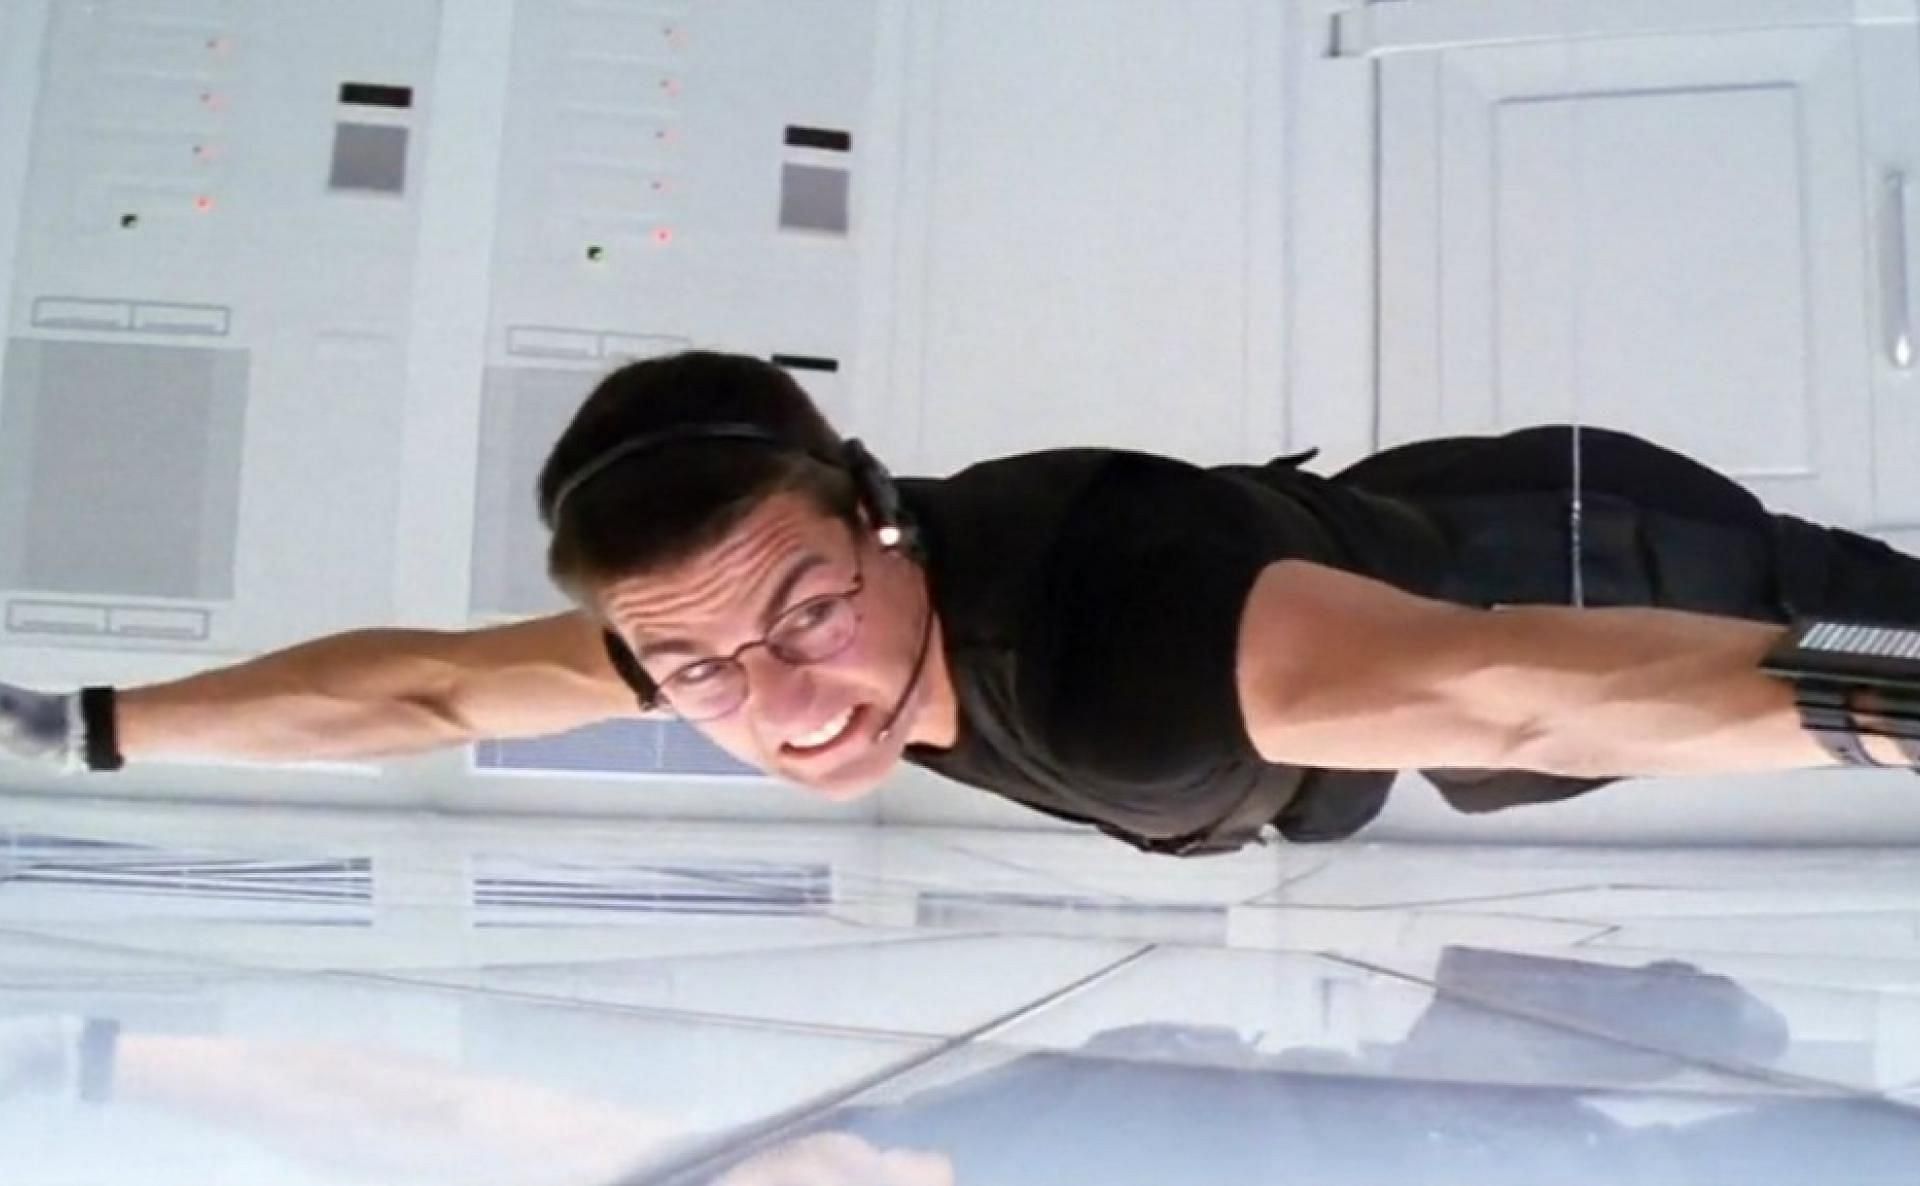 A still from Mission: Impossible (Image via Paramount Pictures)